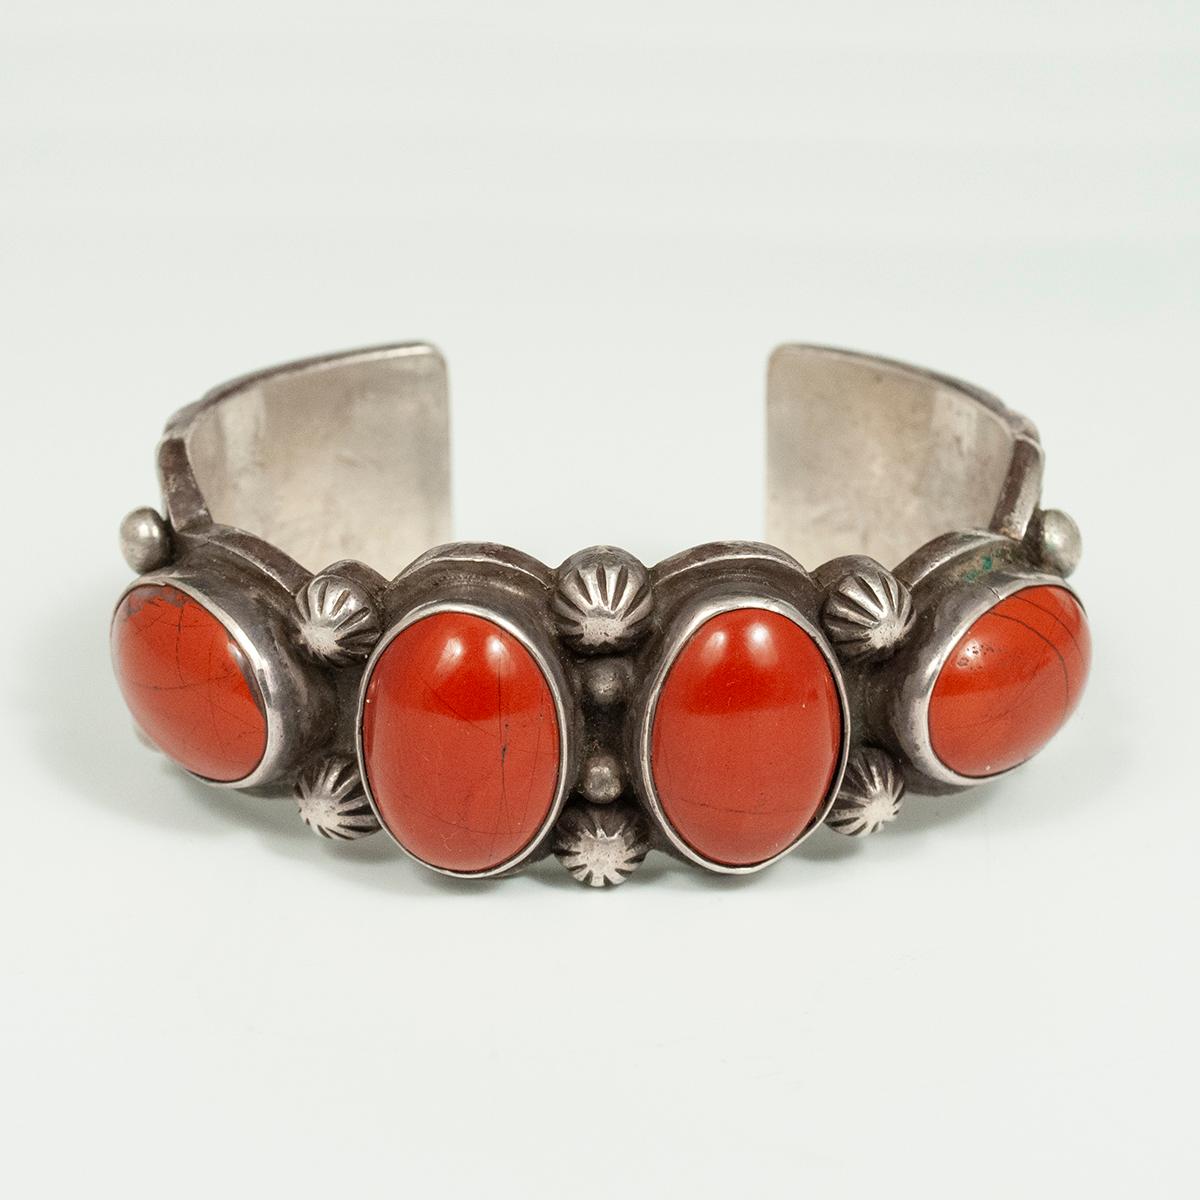 20th century Navajo silversmith Sadie Calvin Jasper and Silver bracelet

Four gorgeous red jasper cabochons are set in this nicely stamped silver bracelet by Sadie Calvin (Dine), a silversmith for the distinguished jewelry company B. G. Mudd of